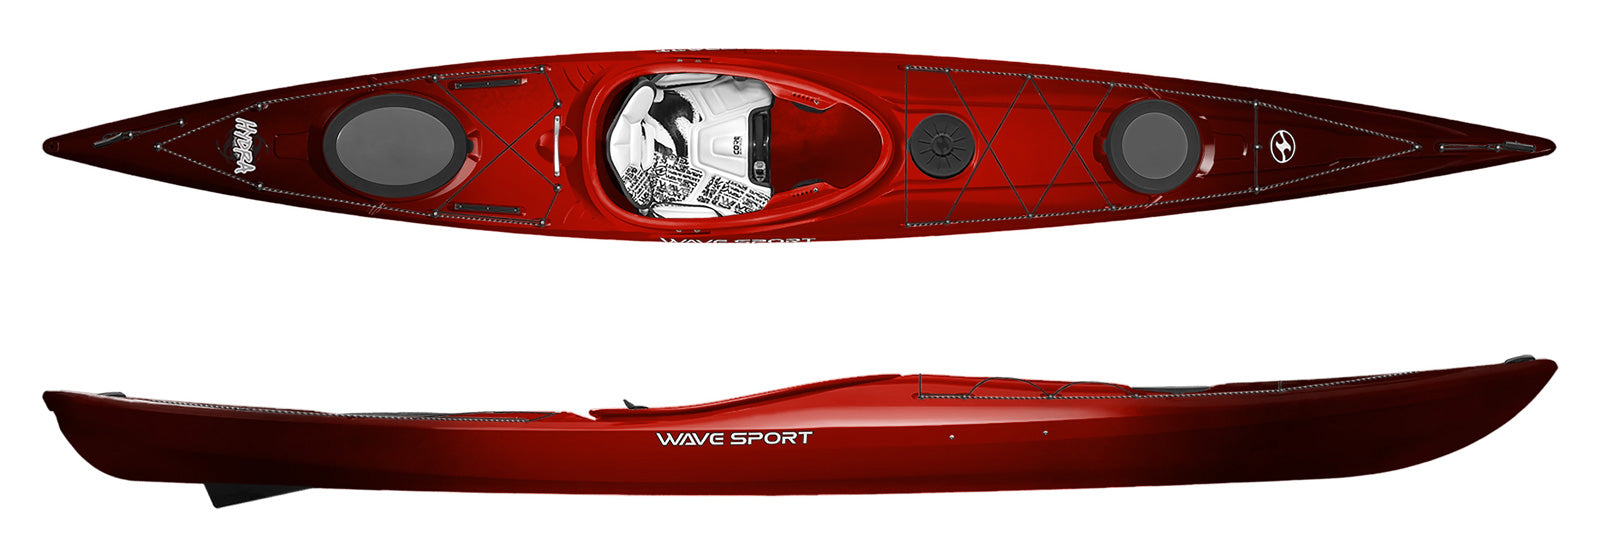 Wavesport Hydra Performance Touring Kayak available from Canoe Shops Group